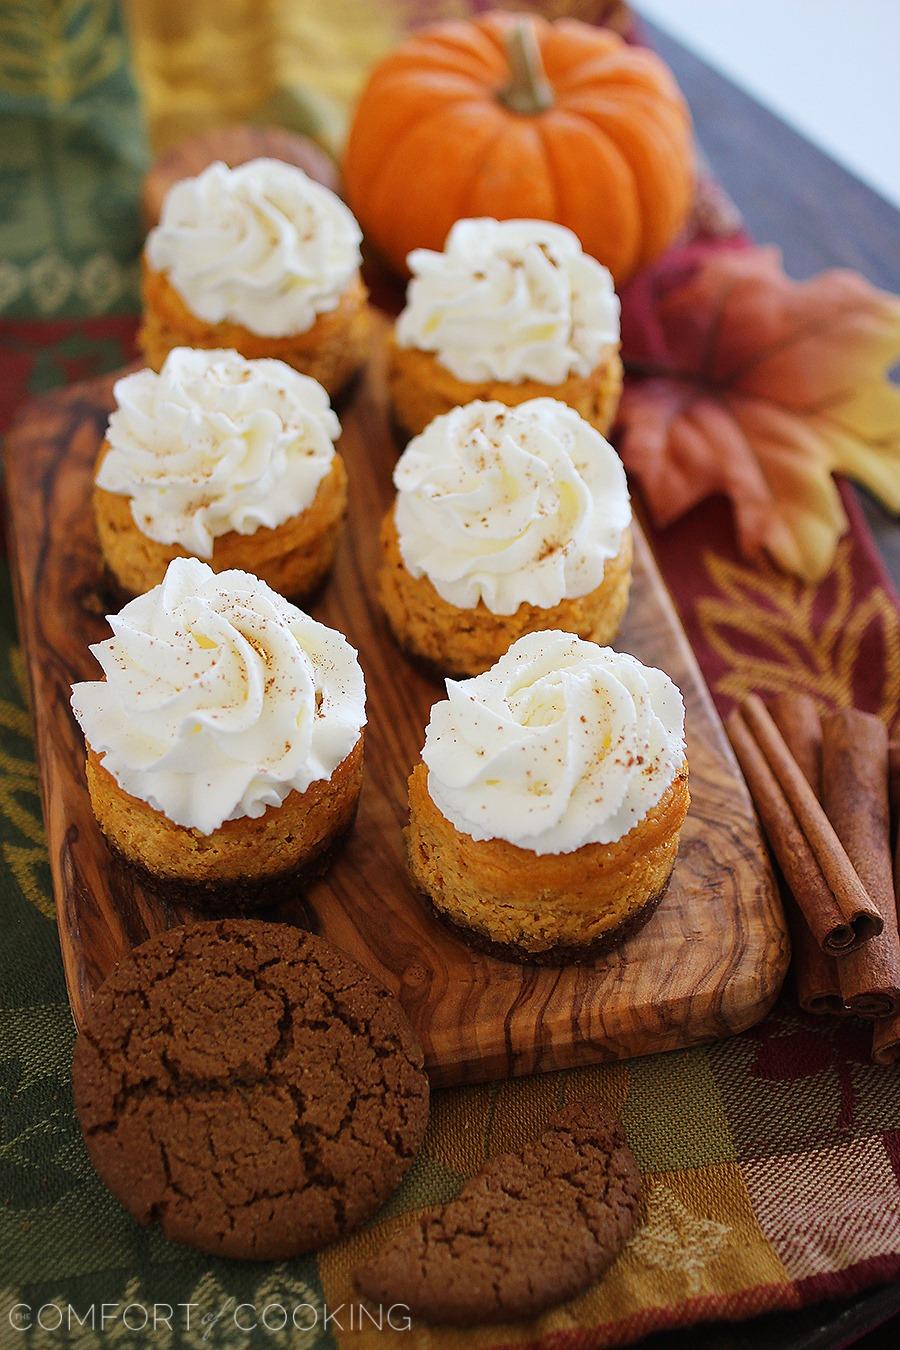 Mini Pumpkin Cheesecakes with Gingersnap Crusts – These creamy pumpkin cheesecakes with spiced gingersnap cookie crusts are to die for! | thecomfortofcooking.com